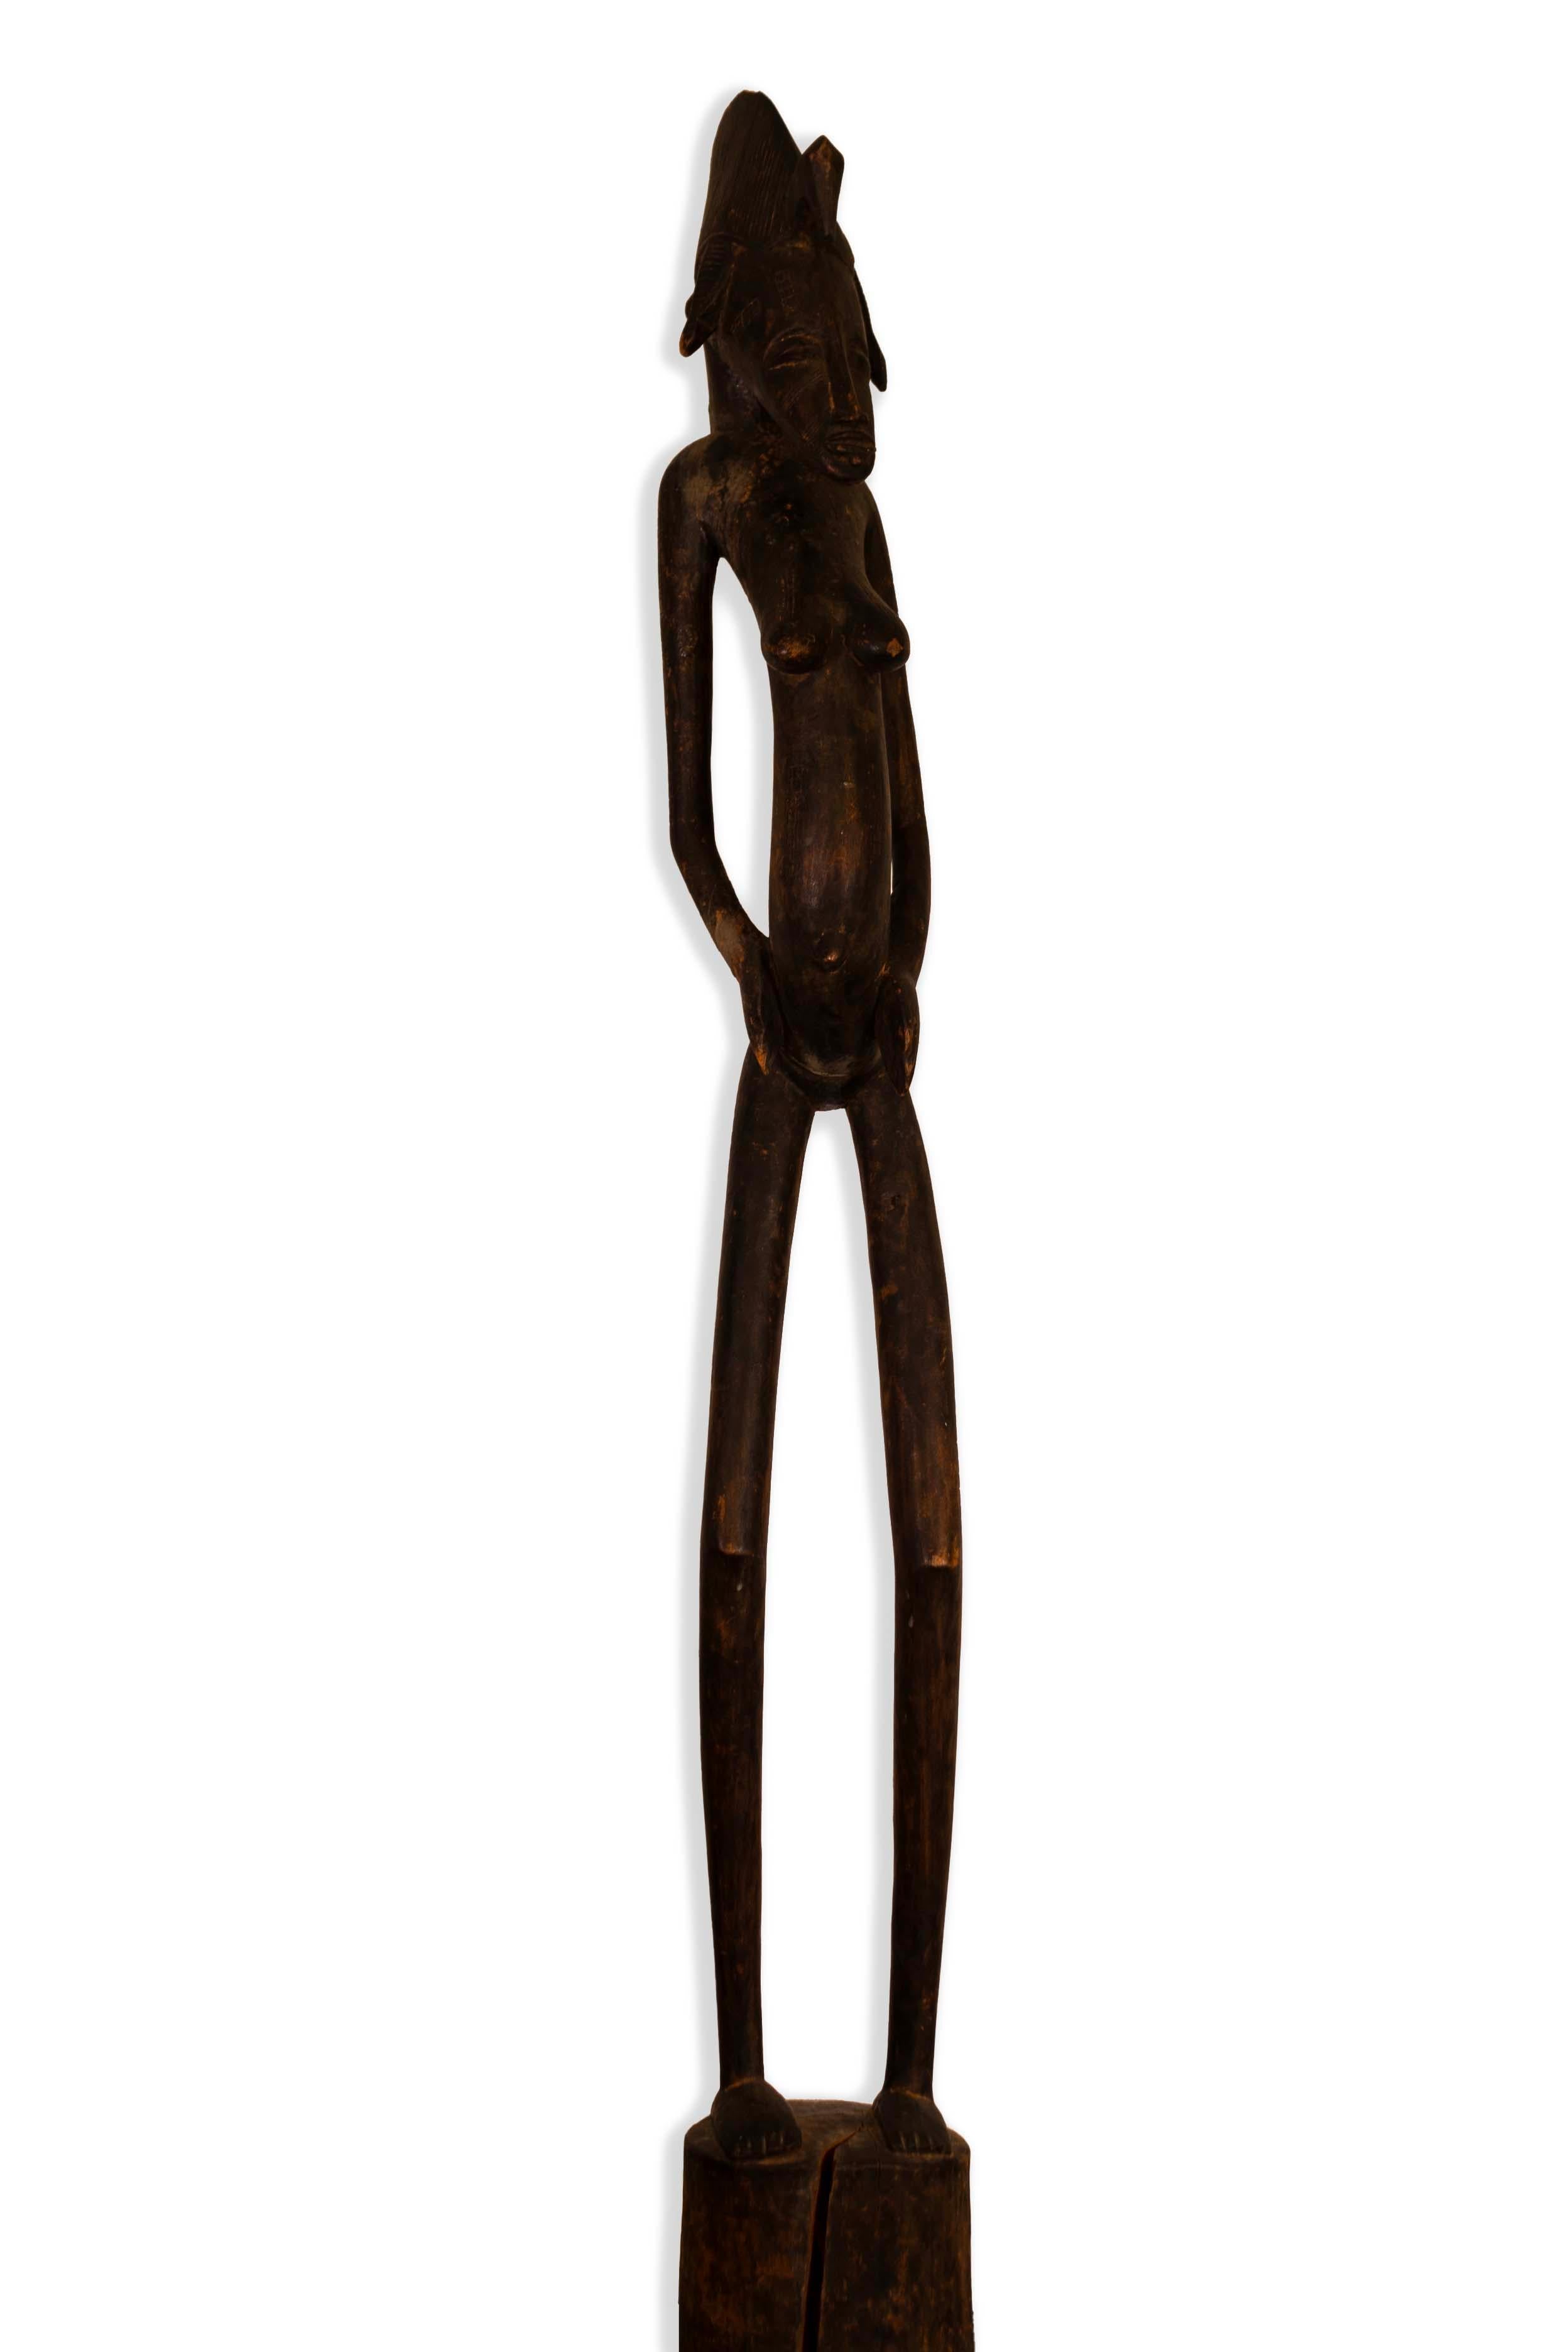 A monumental African female fertility standing sculpture associated with the Zulu people in South Africa. The female form is exquisitely carved in the teakwood. A unique collector’s item showcasing African art and history. From a private collection.